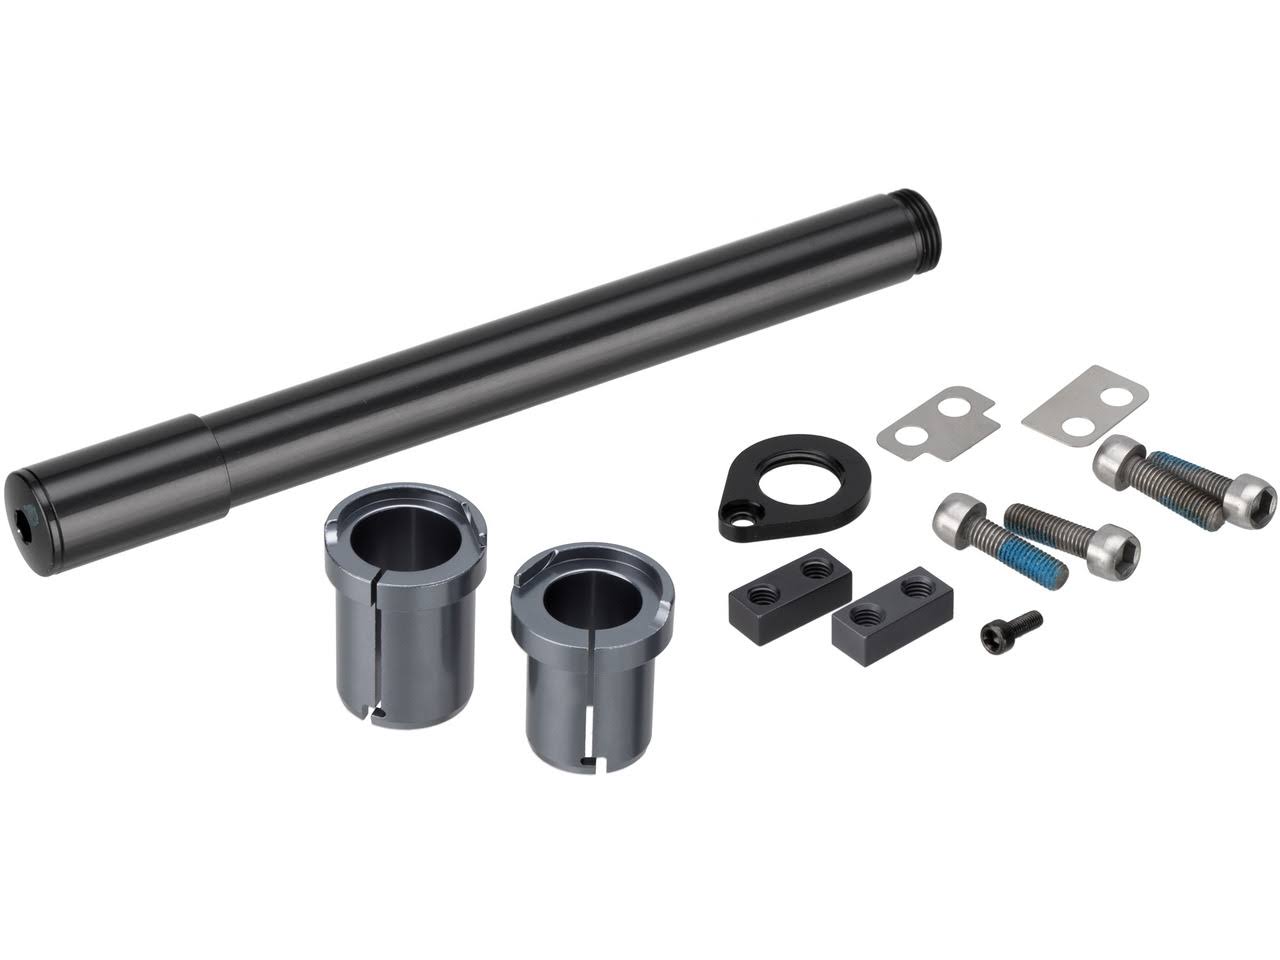 Fox Racing Shox Pinch Axle Kit for 36 Suspension Forks Models as of 2017